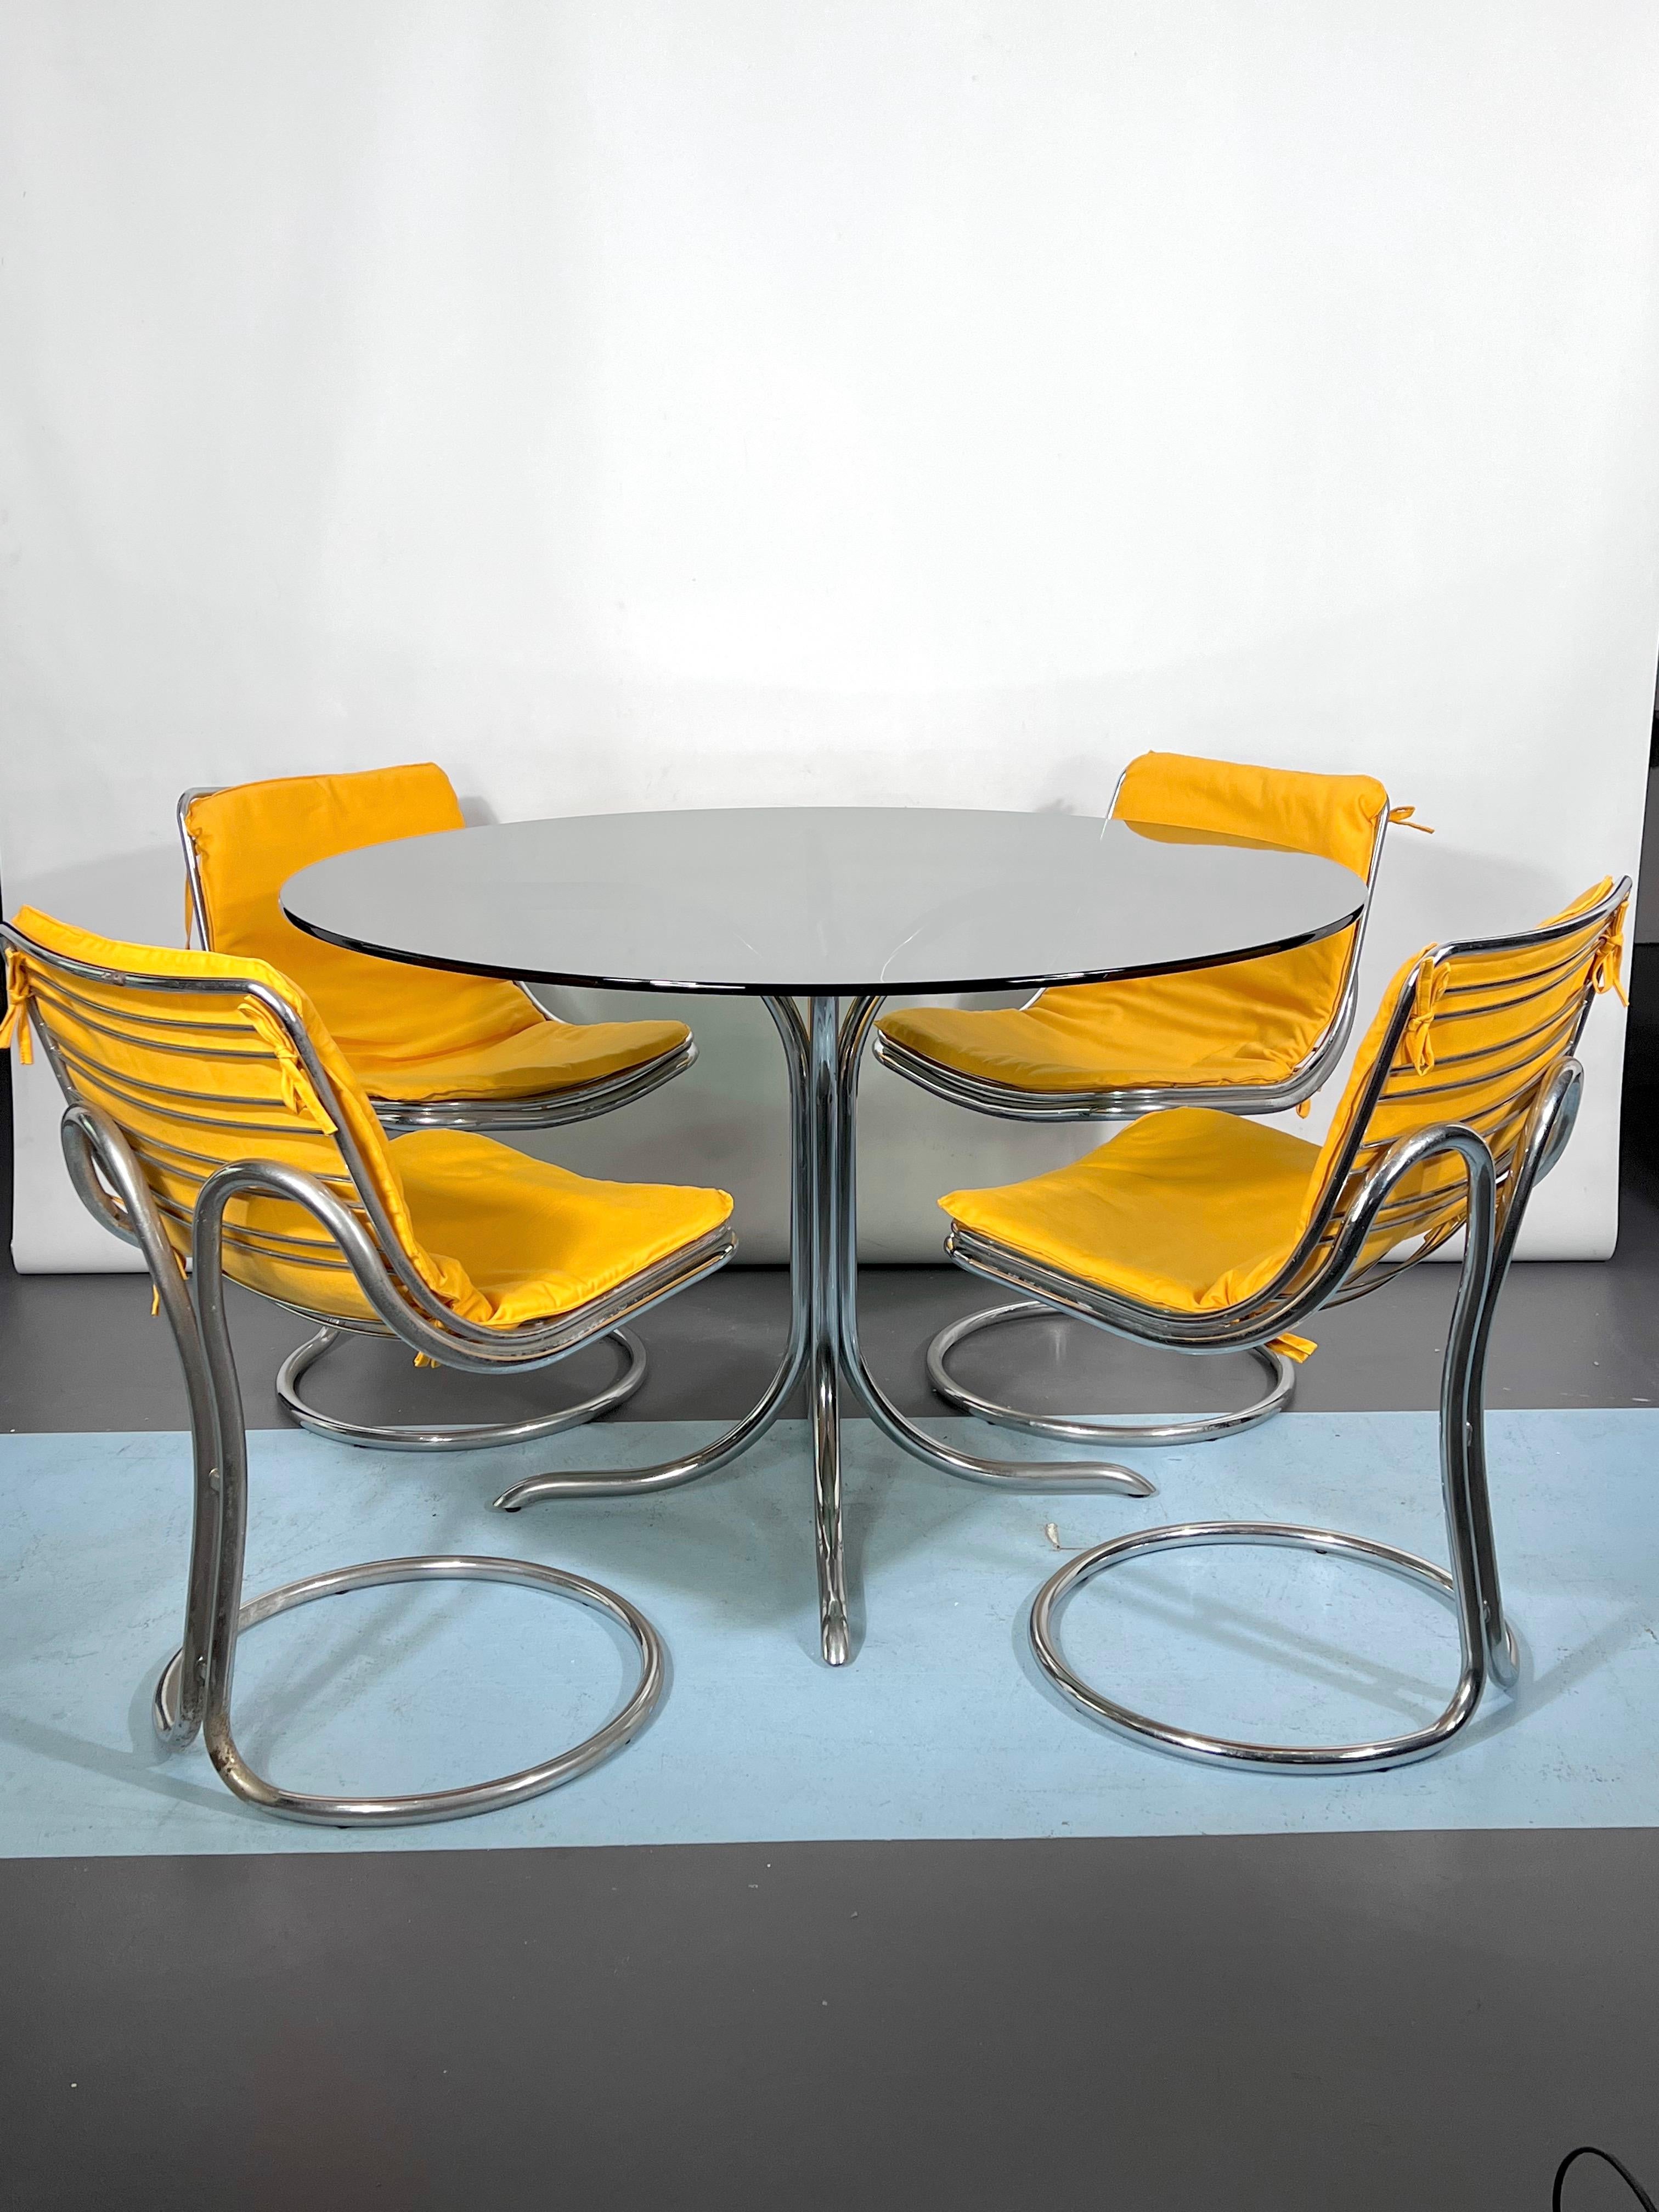 Very good original vintage condition with trace of age and use and small oxidation on the chrome for this set of a dinner table plus four chairs. Reminiscent of the style of Gastone Rinaldi for Rima, they’re made from chrome. The round fumè glass